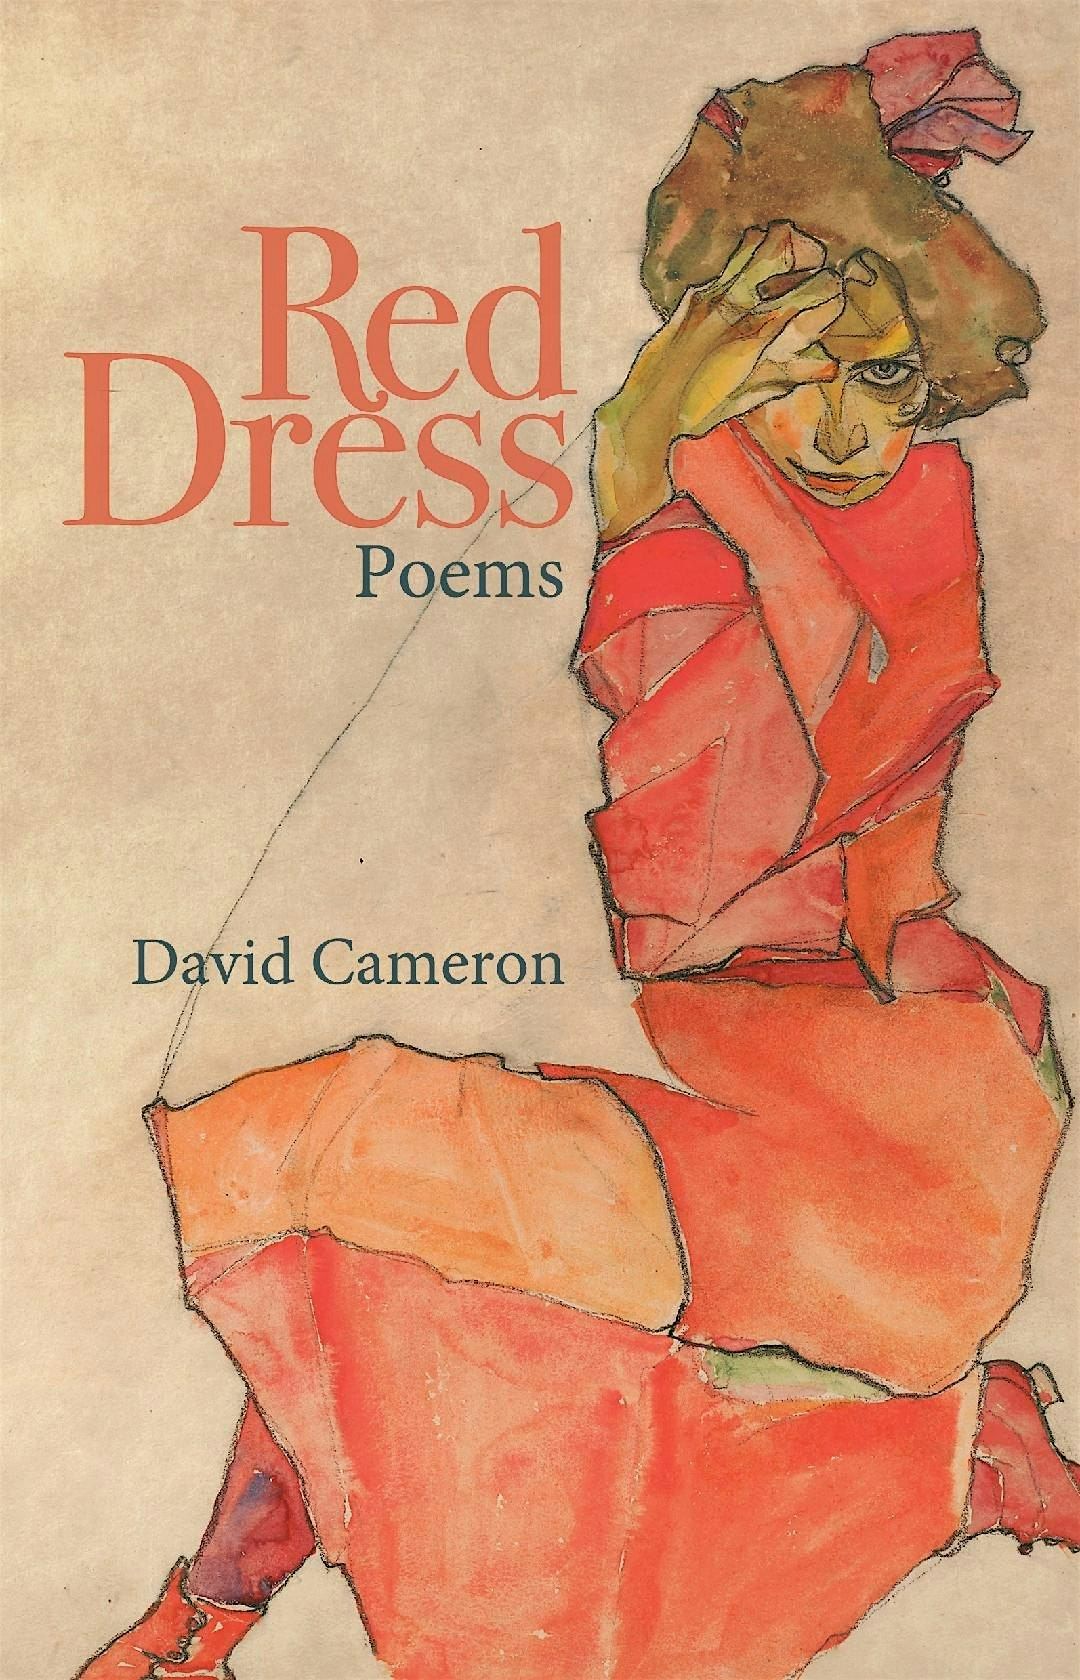 Launch of 'Red Dress' by David Cameron